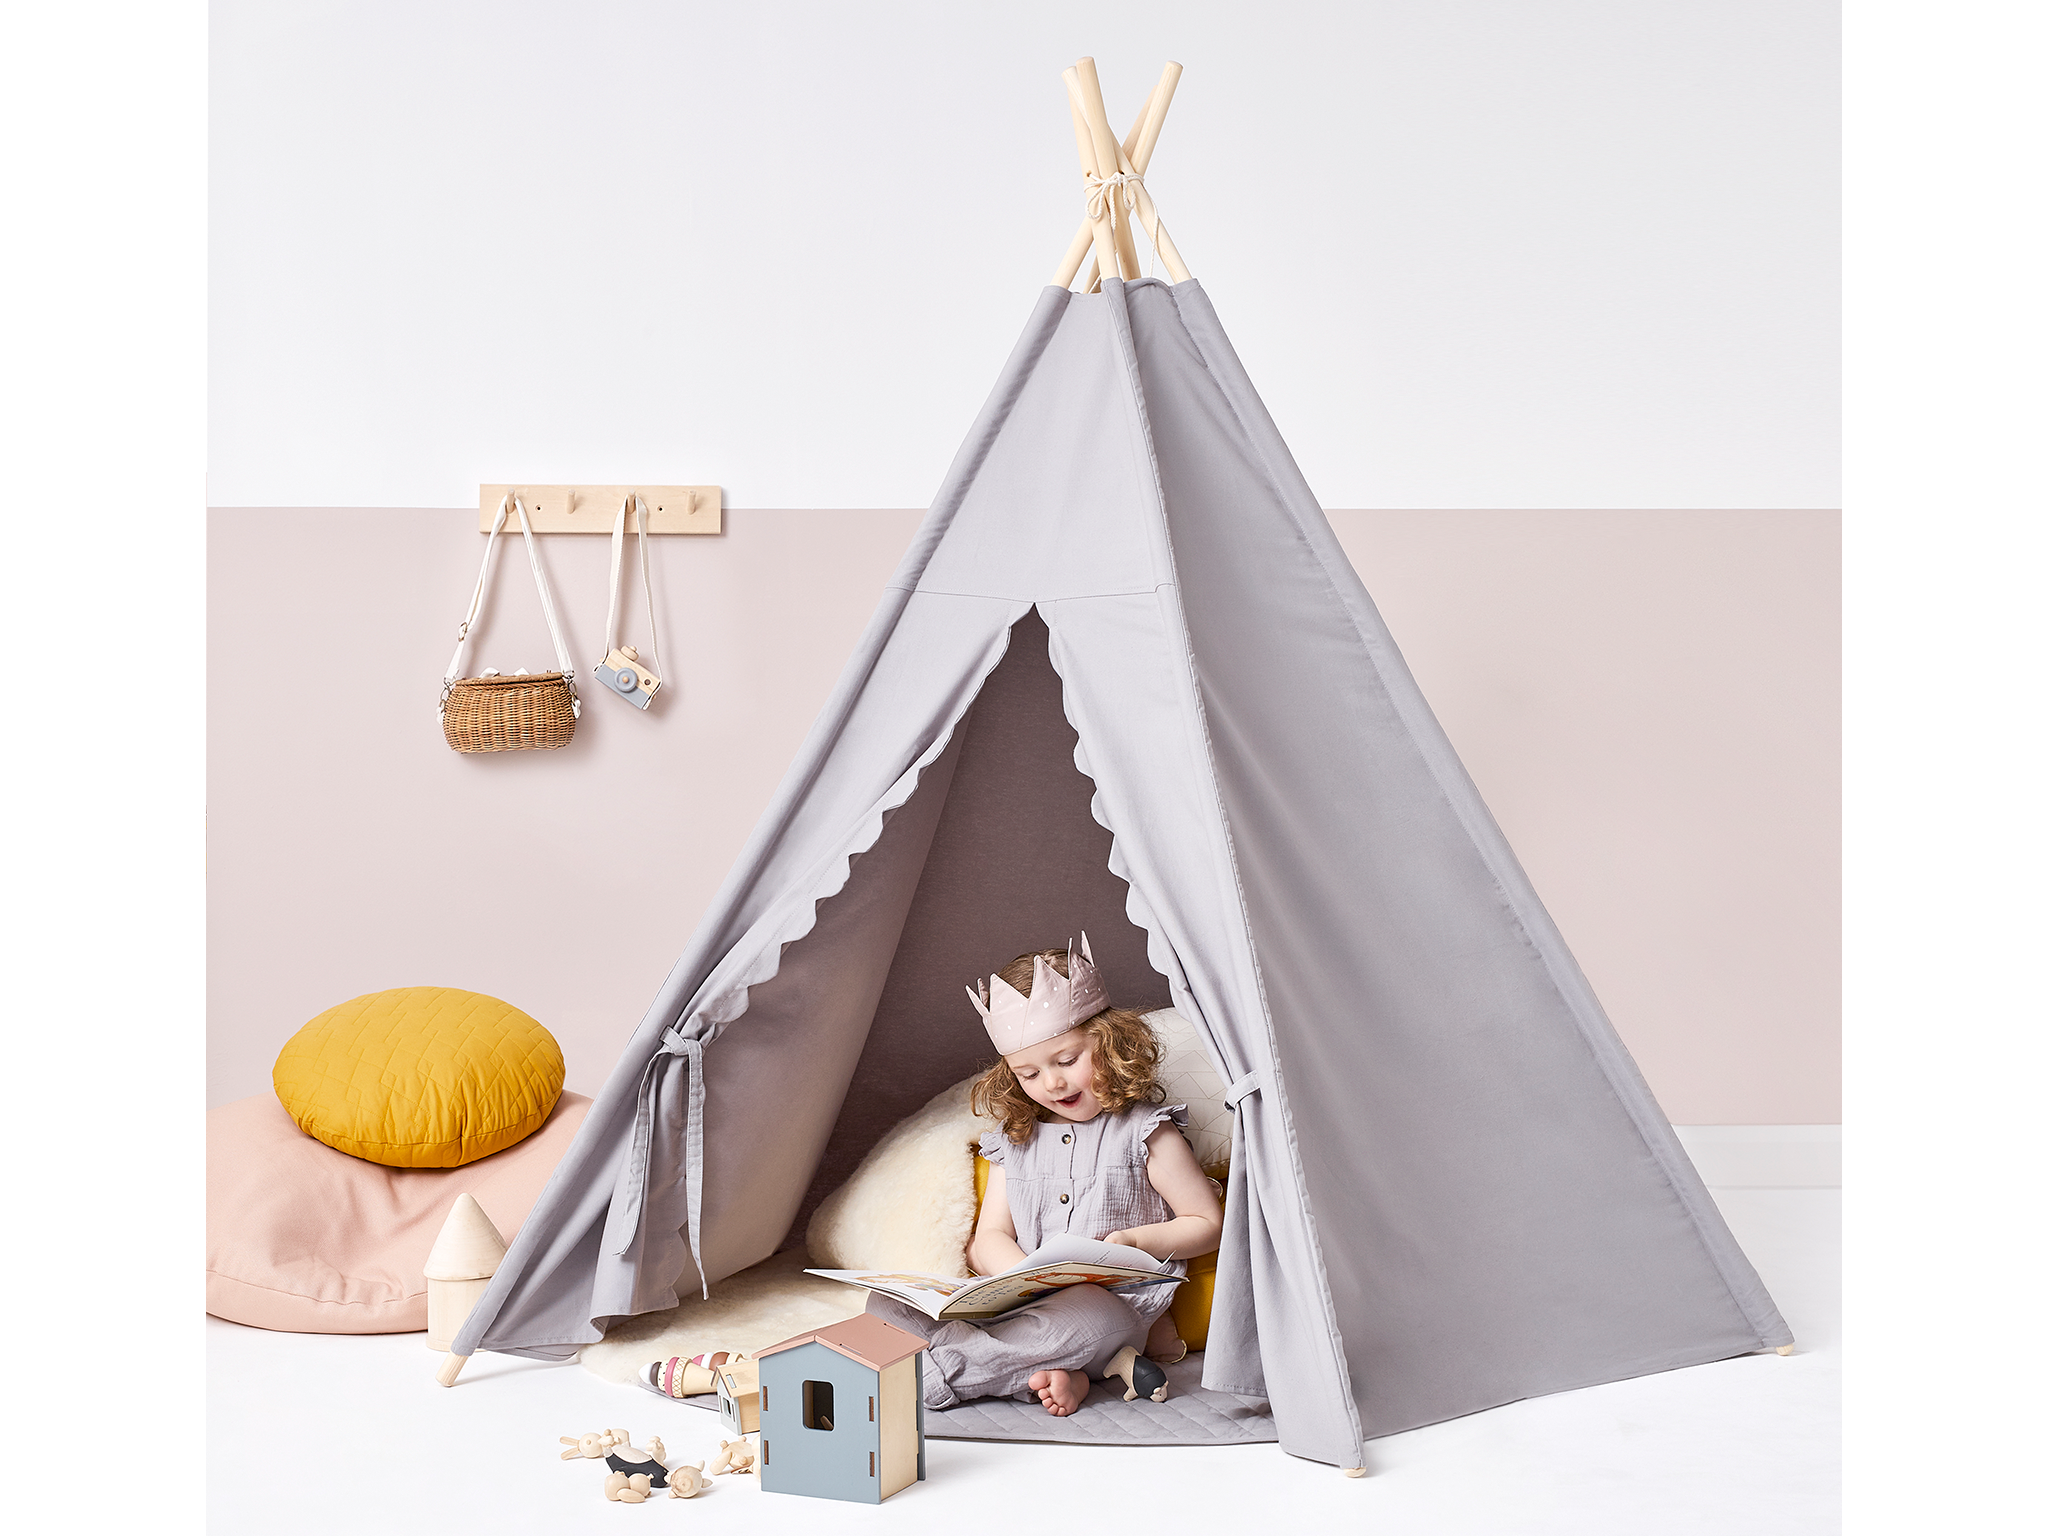 PLAY 10 Kids Tent Dinosaur Castle Pop up Tent for Indoor and Outdoor Fun,Neatly Folds into a Carrying Bag 